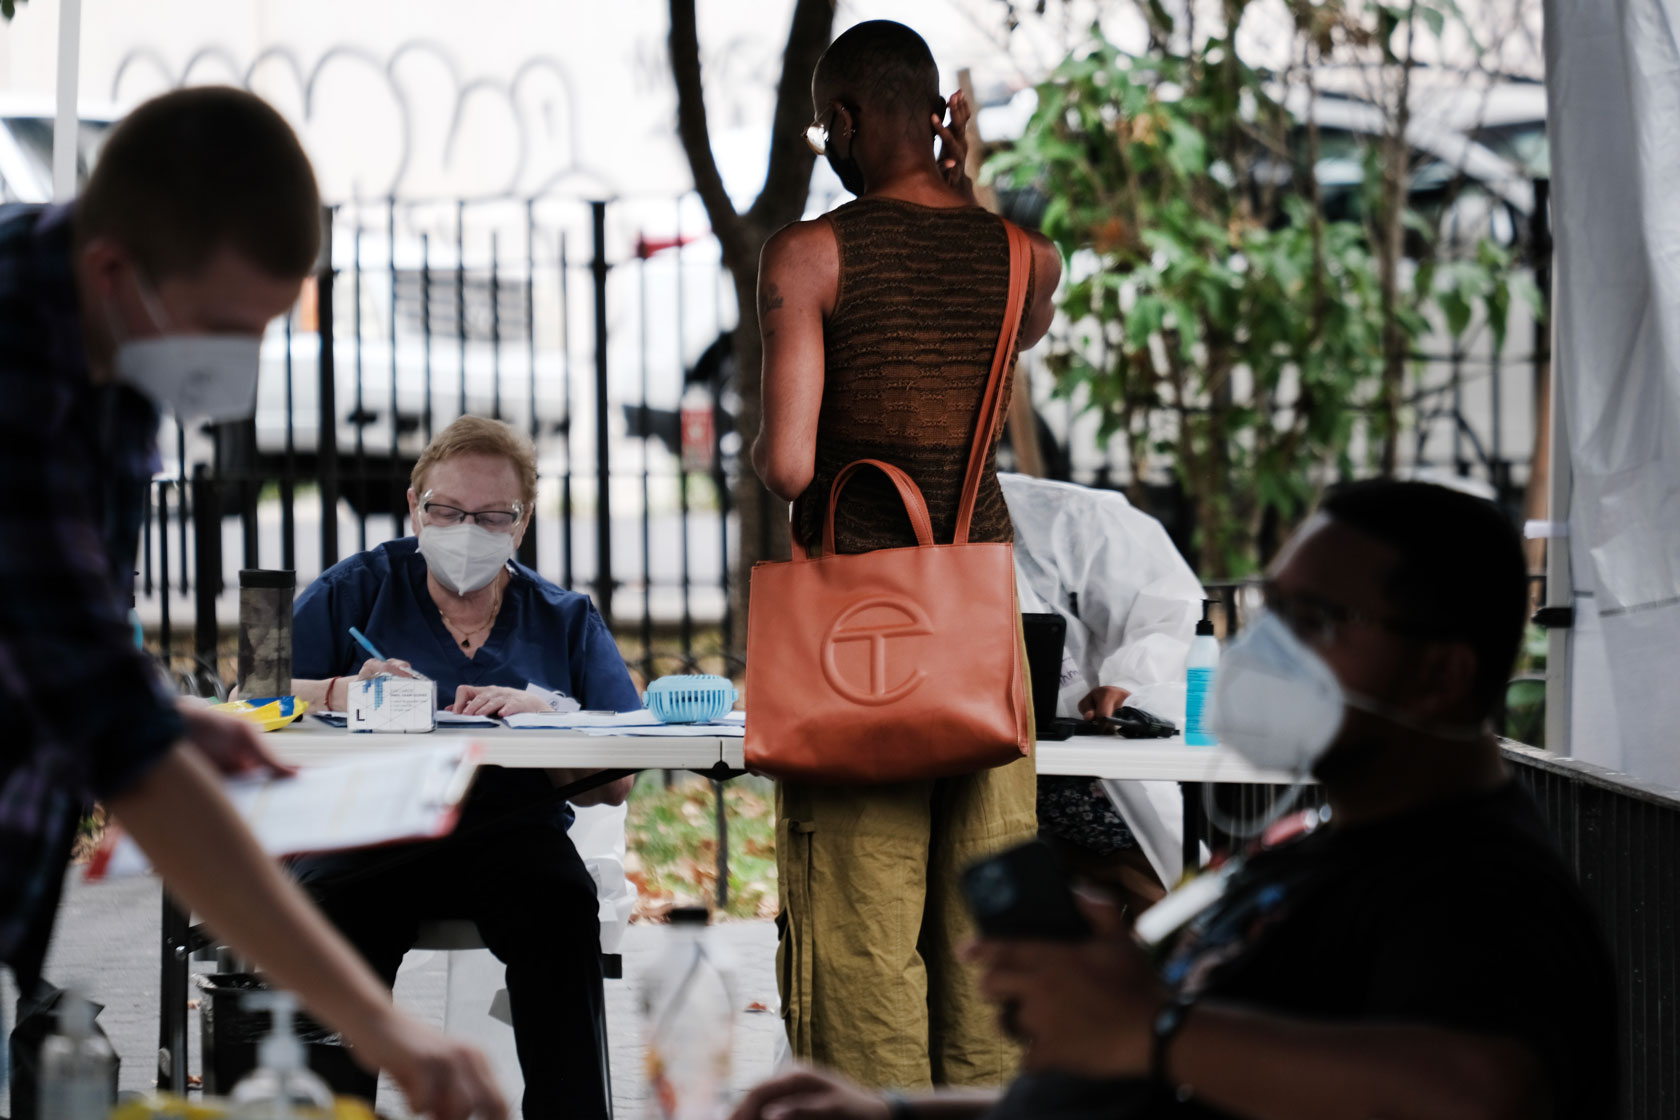 Health care workers work at intake tents in New York City.